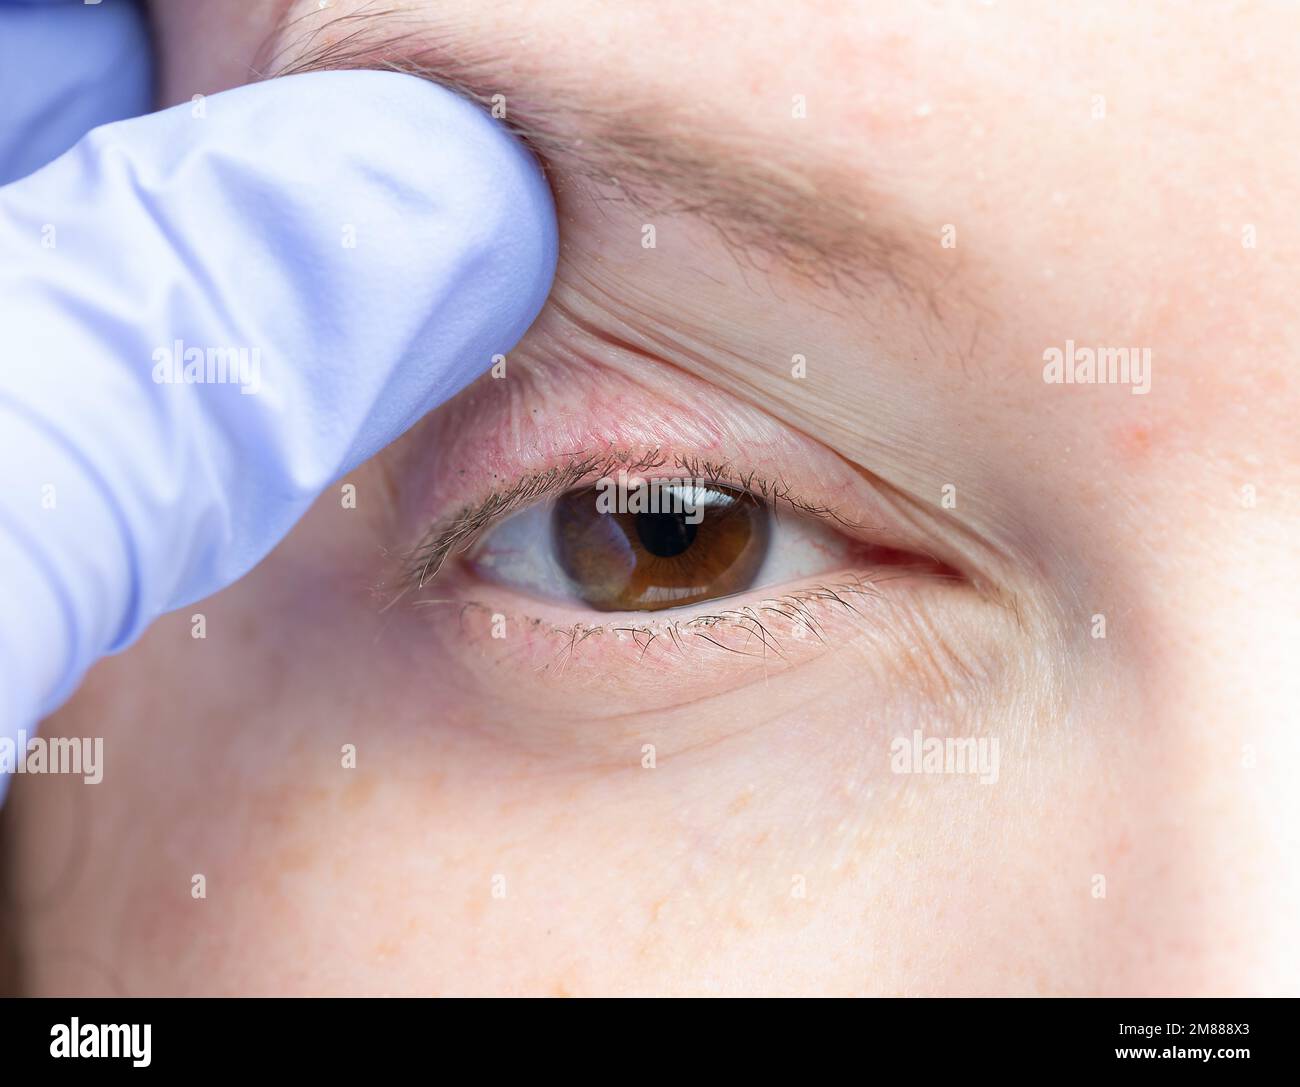 close up of a woman's eye with a bacterial infection of an oil gland in the lower eyelid. Stock Photo